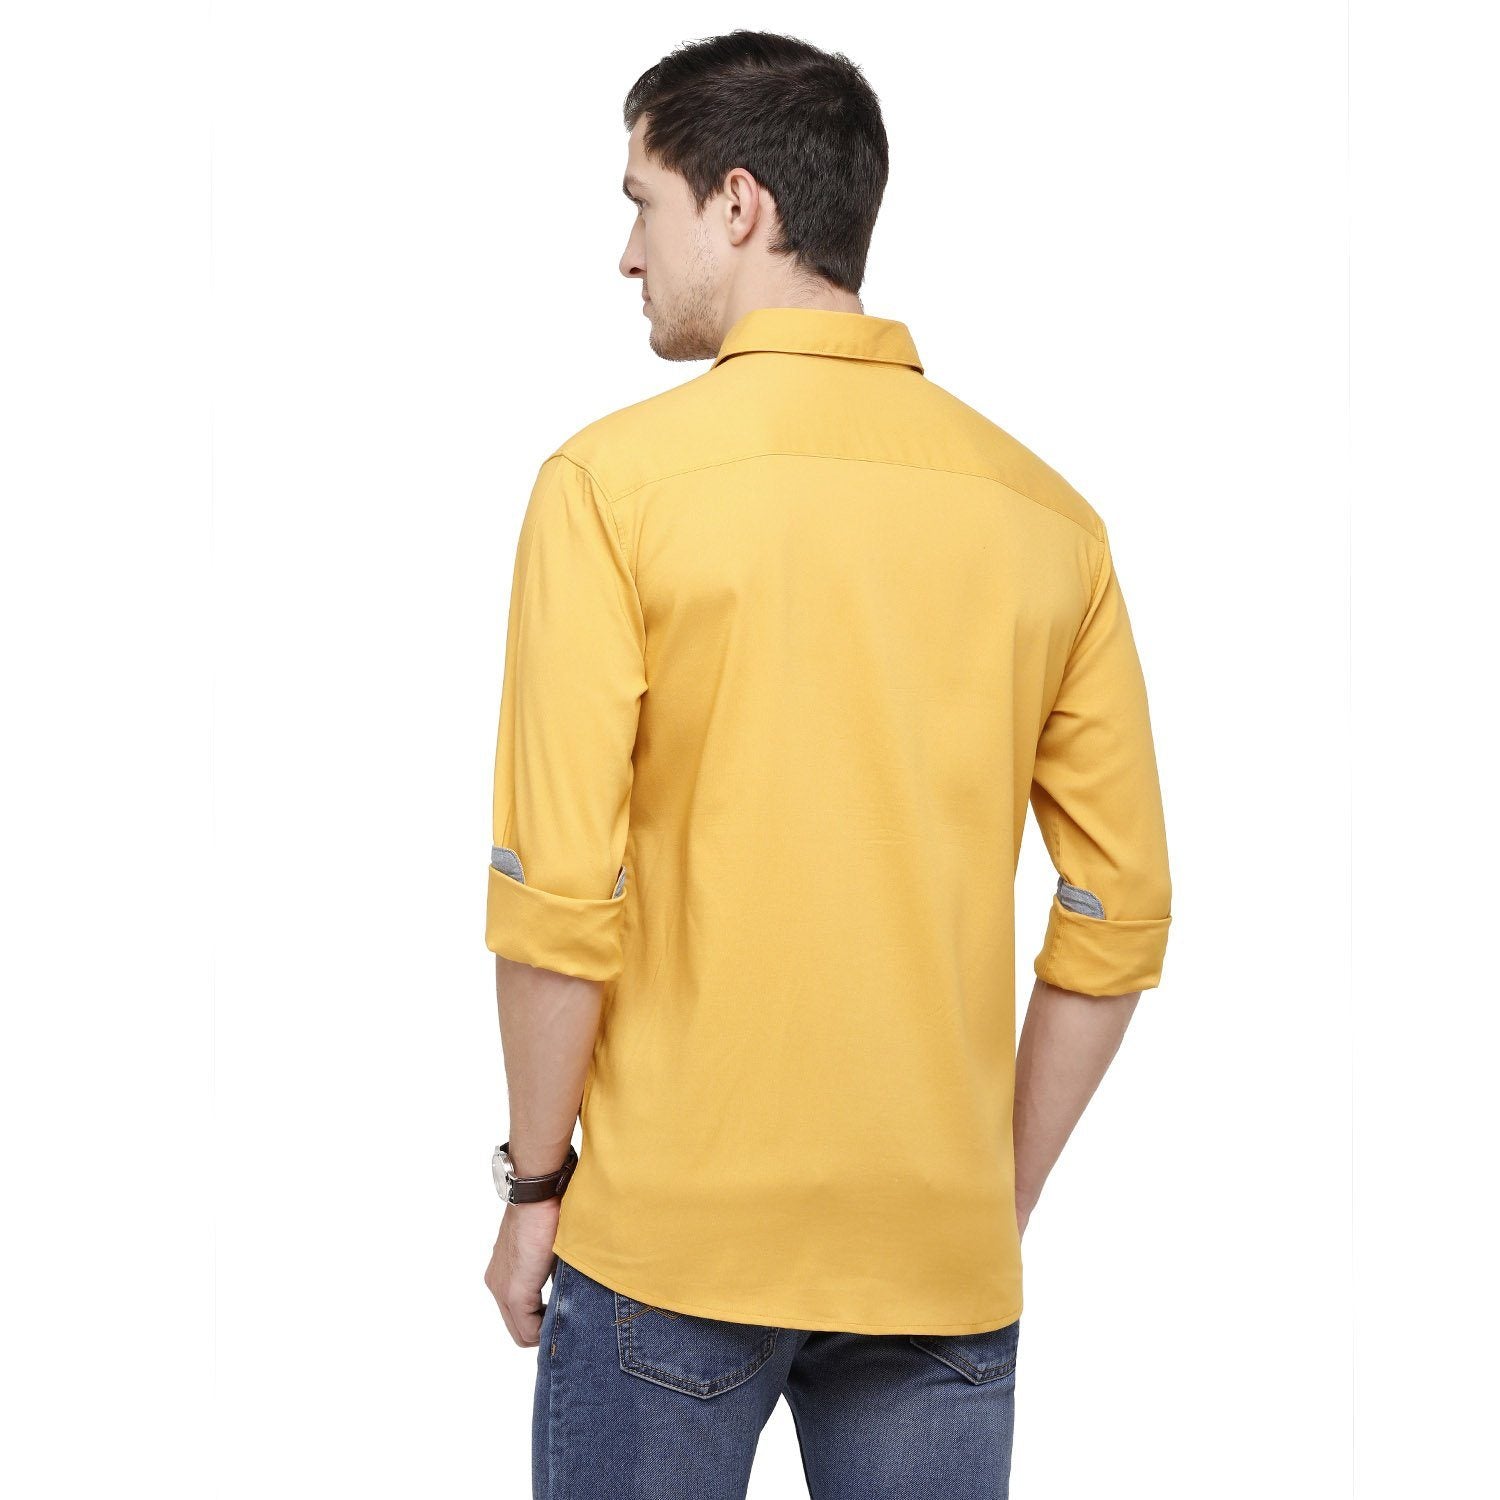 Swiss Club Mens Solid Collar Neck Full Sleeve Slim Fit Cotton Blended Yellow Fashion Woven Shirt ( S-SC-78 A-FS-SLD-SF ) Shirts Swiss Club 